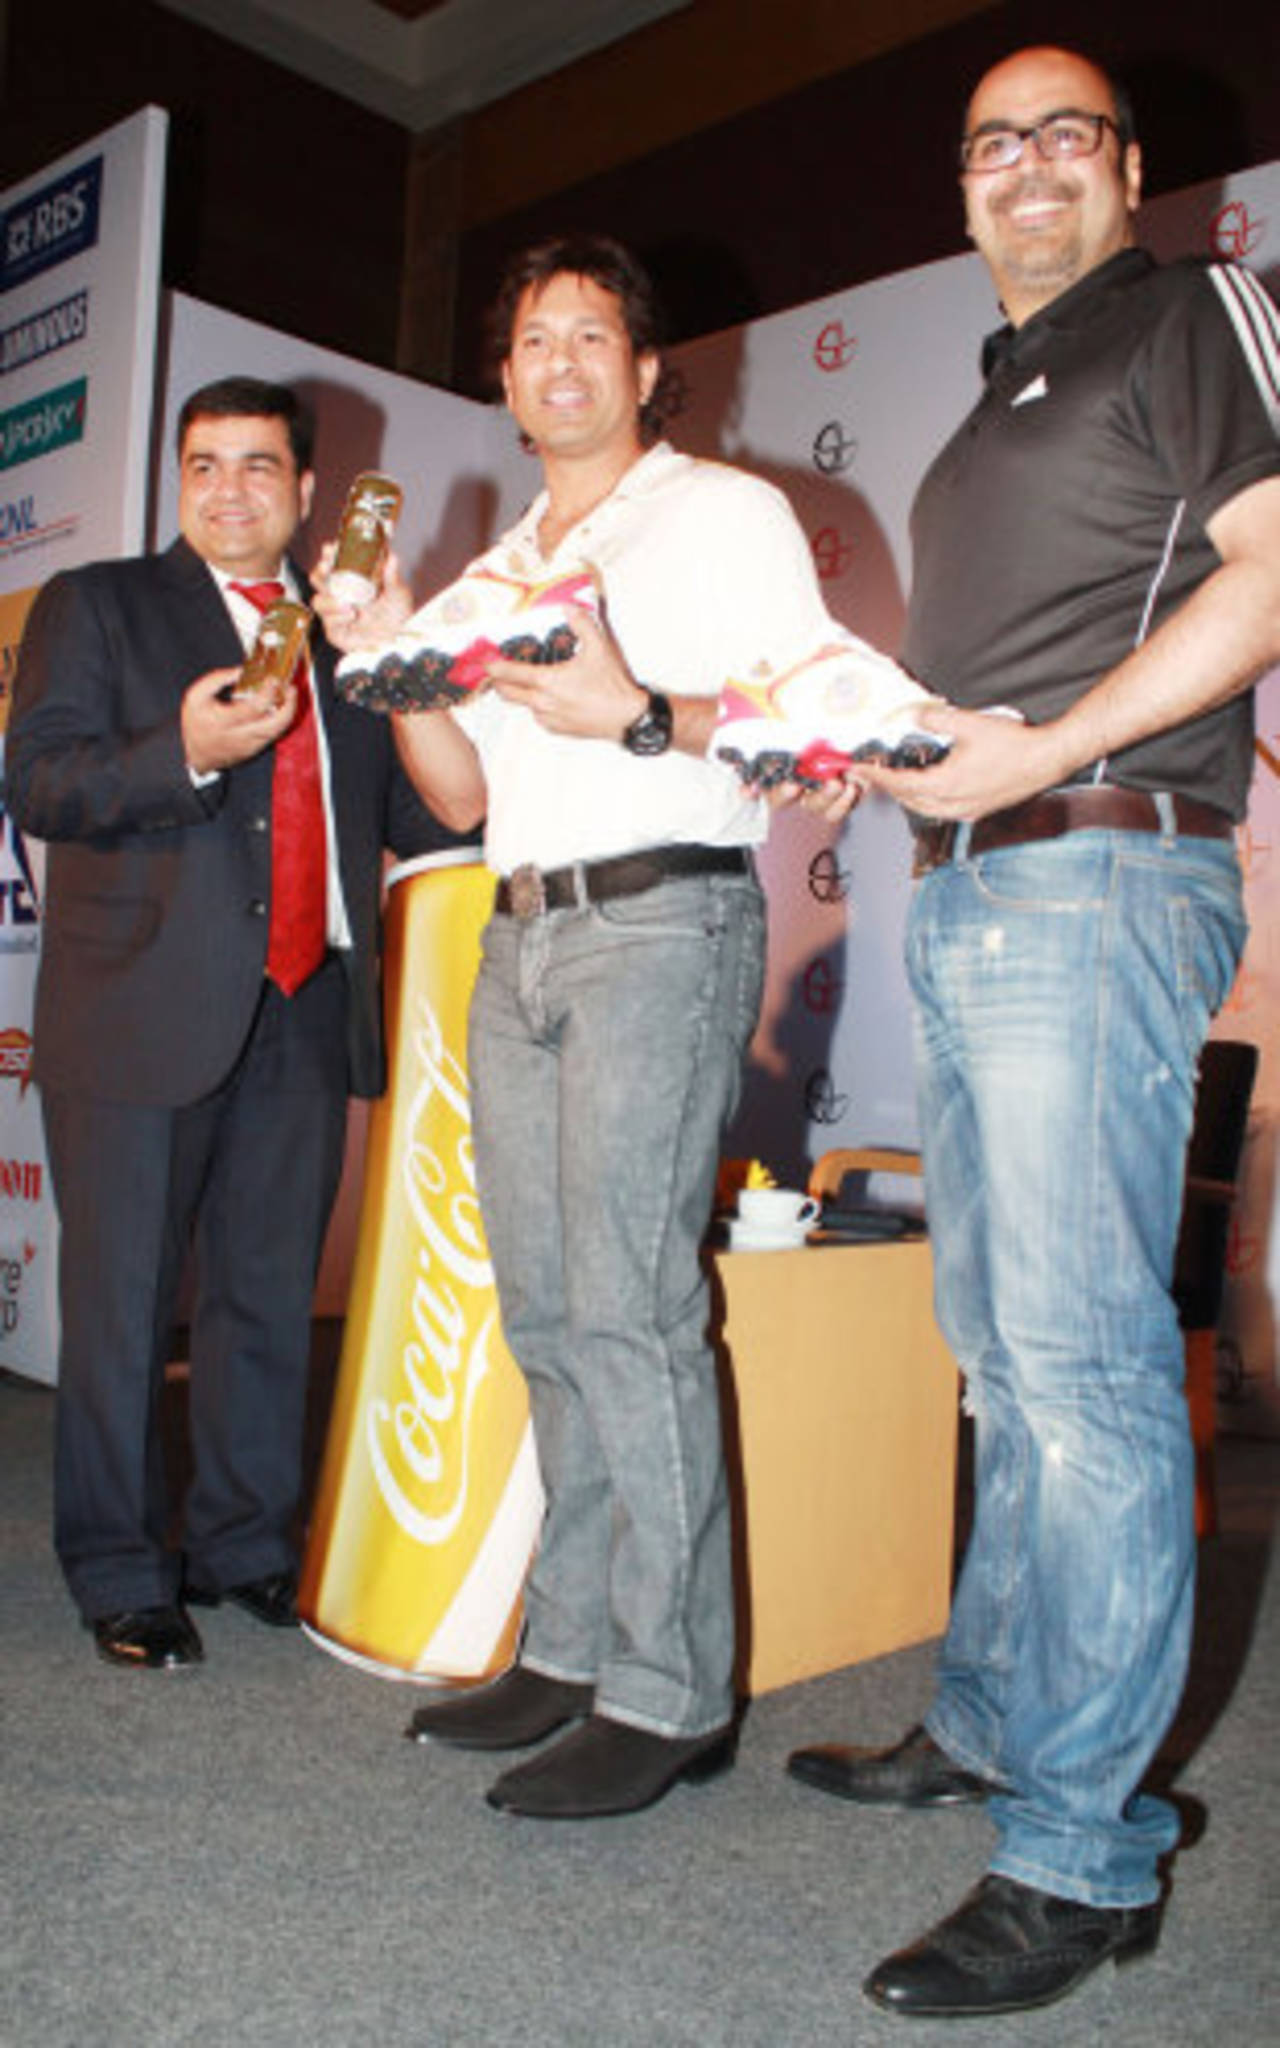 Since scoring the 100th hundred Tendulkar has been on a spree of promotional events celebrating it&nbsp;&nbsp;&bull;&nbsp;&nbsp;Getty Images